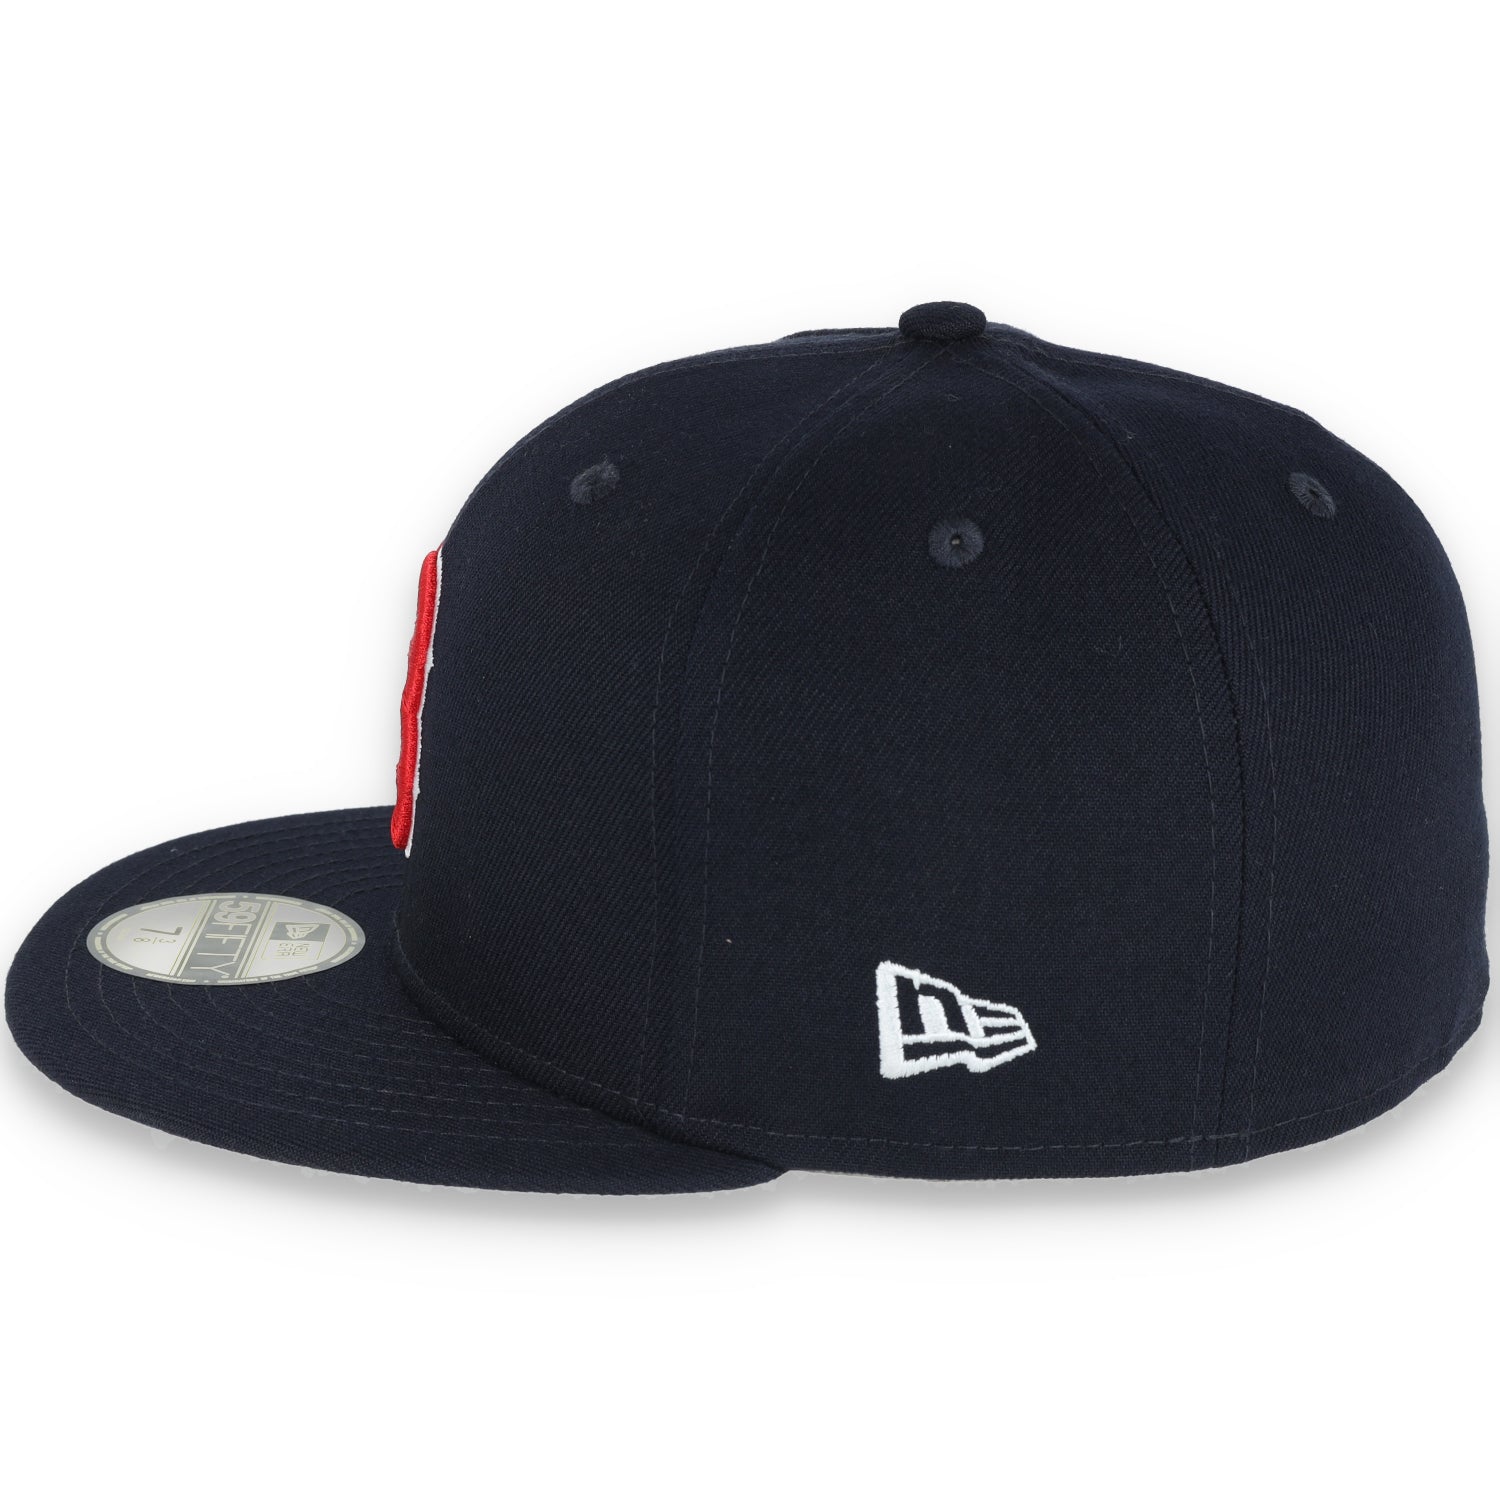 NEW ERA BOSTON RED SOX INAUGURAL SEASON PATCH 59FIFTY FITTED HAT